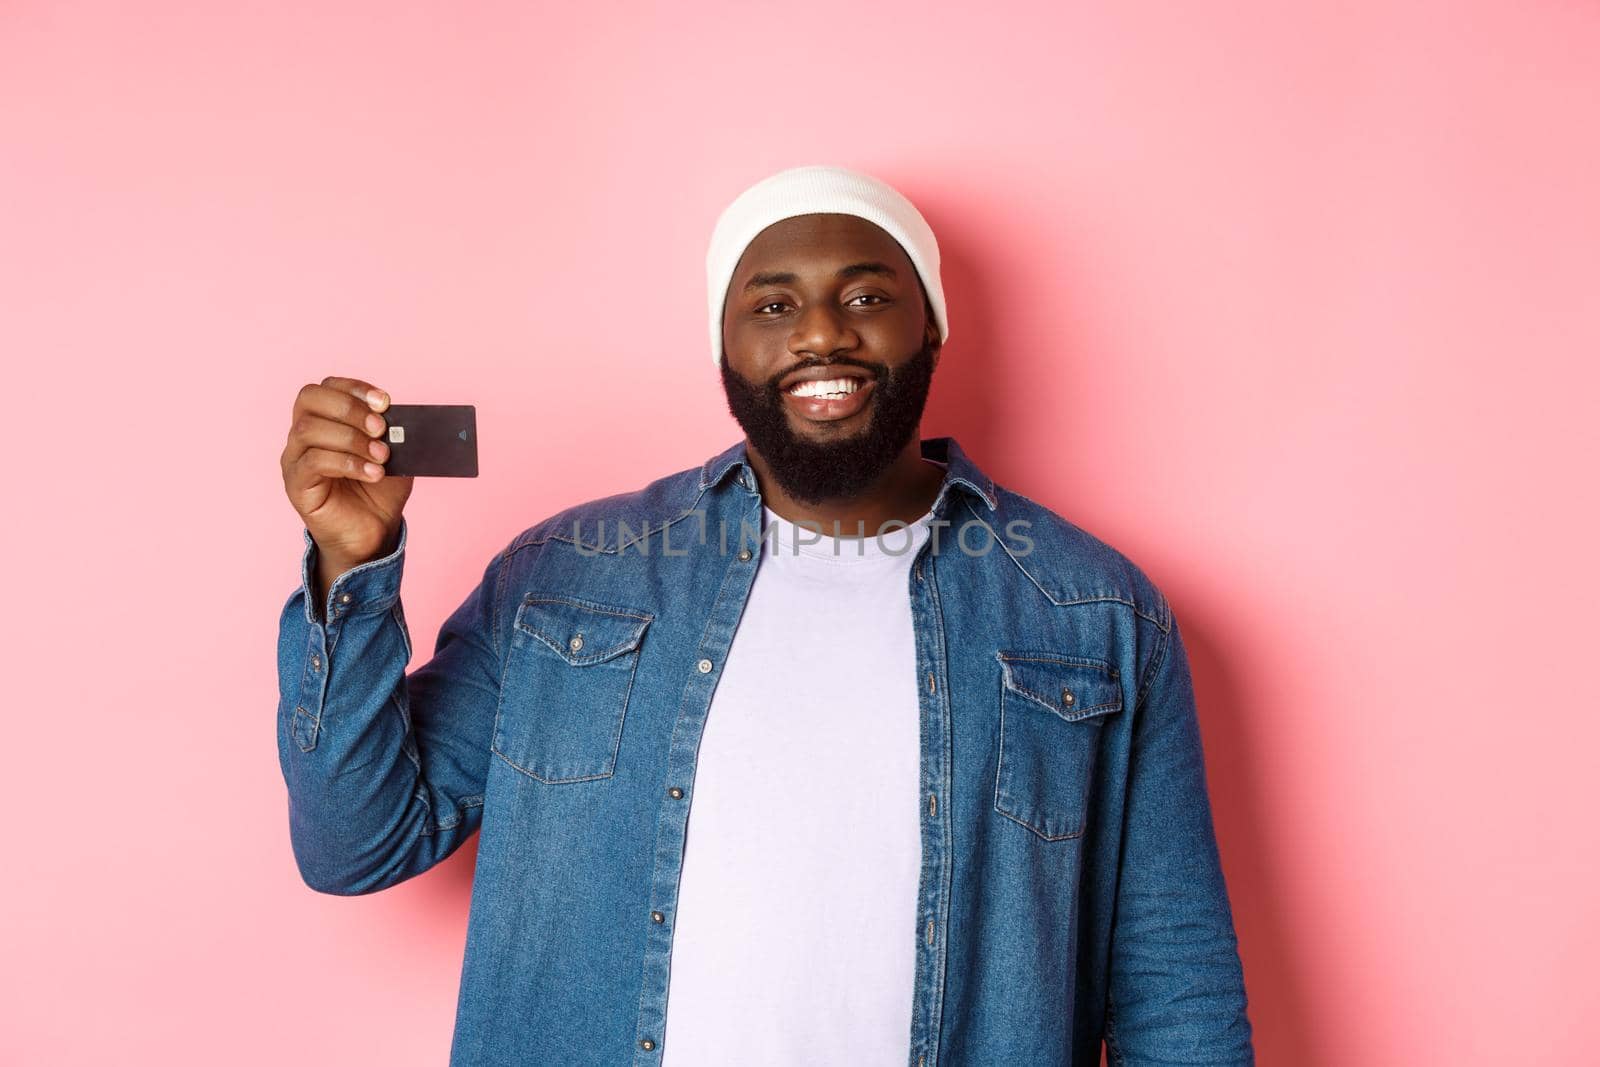 Shopping concept. Satisfied young bearded man in beanie showing credit card, smiling pleased, making purchase, standing over pink background.